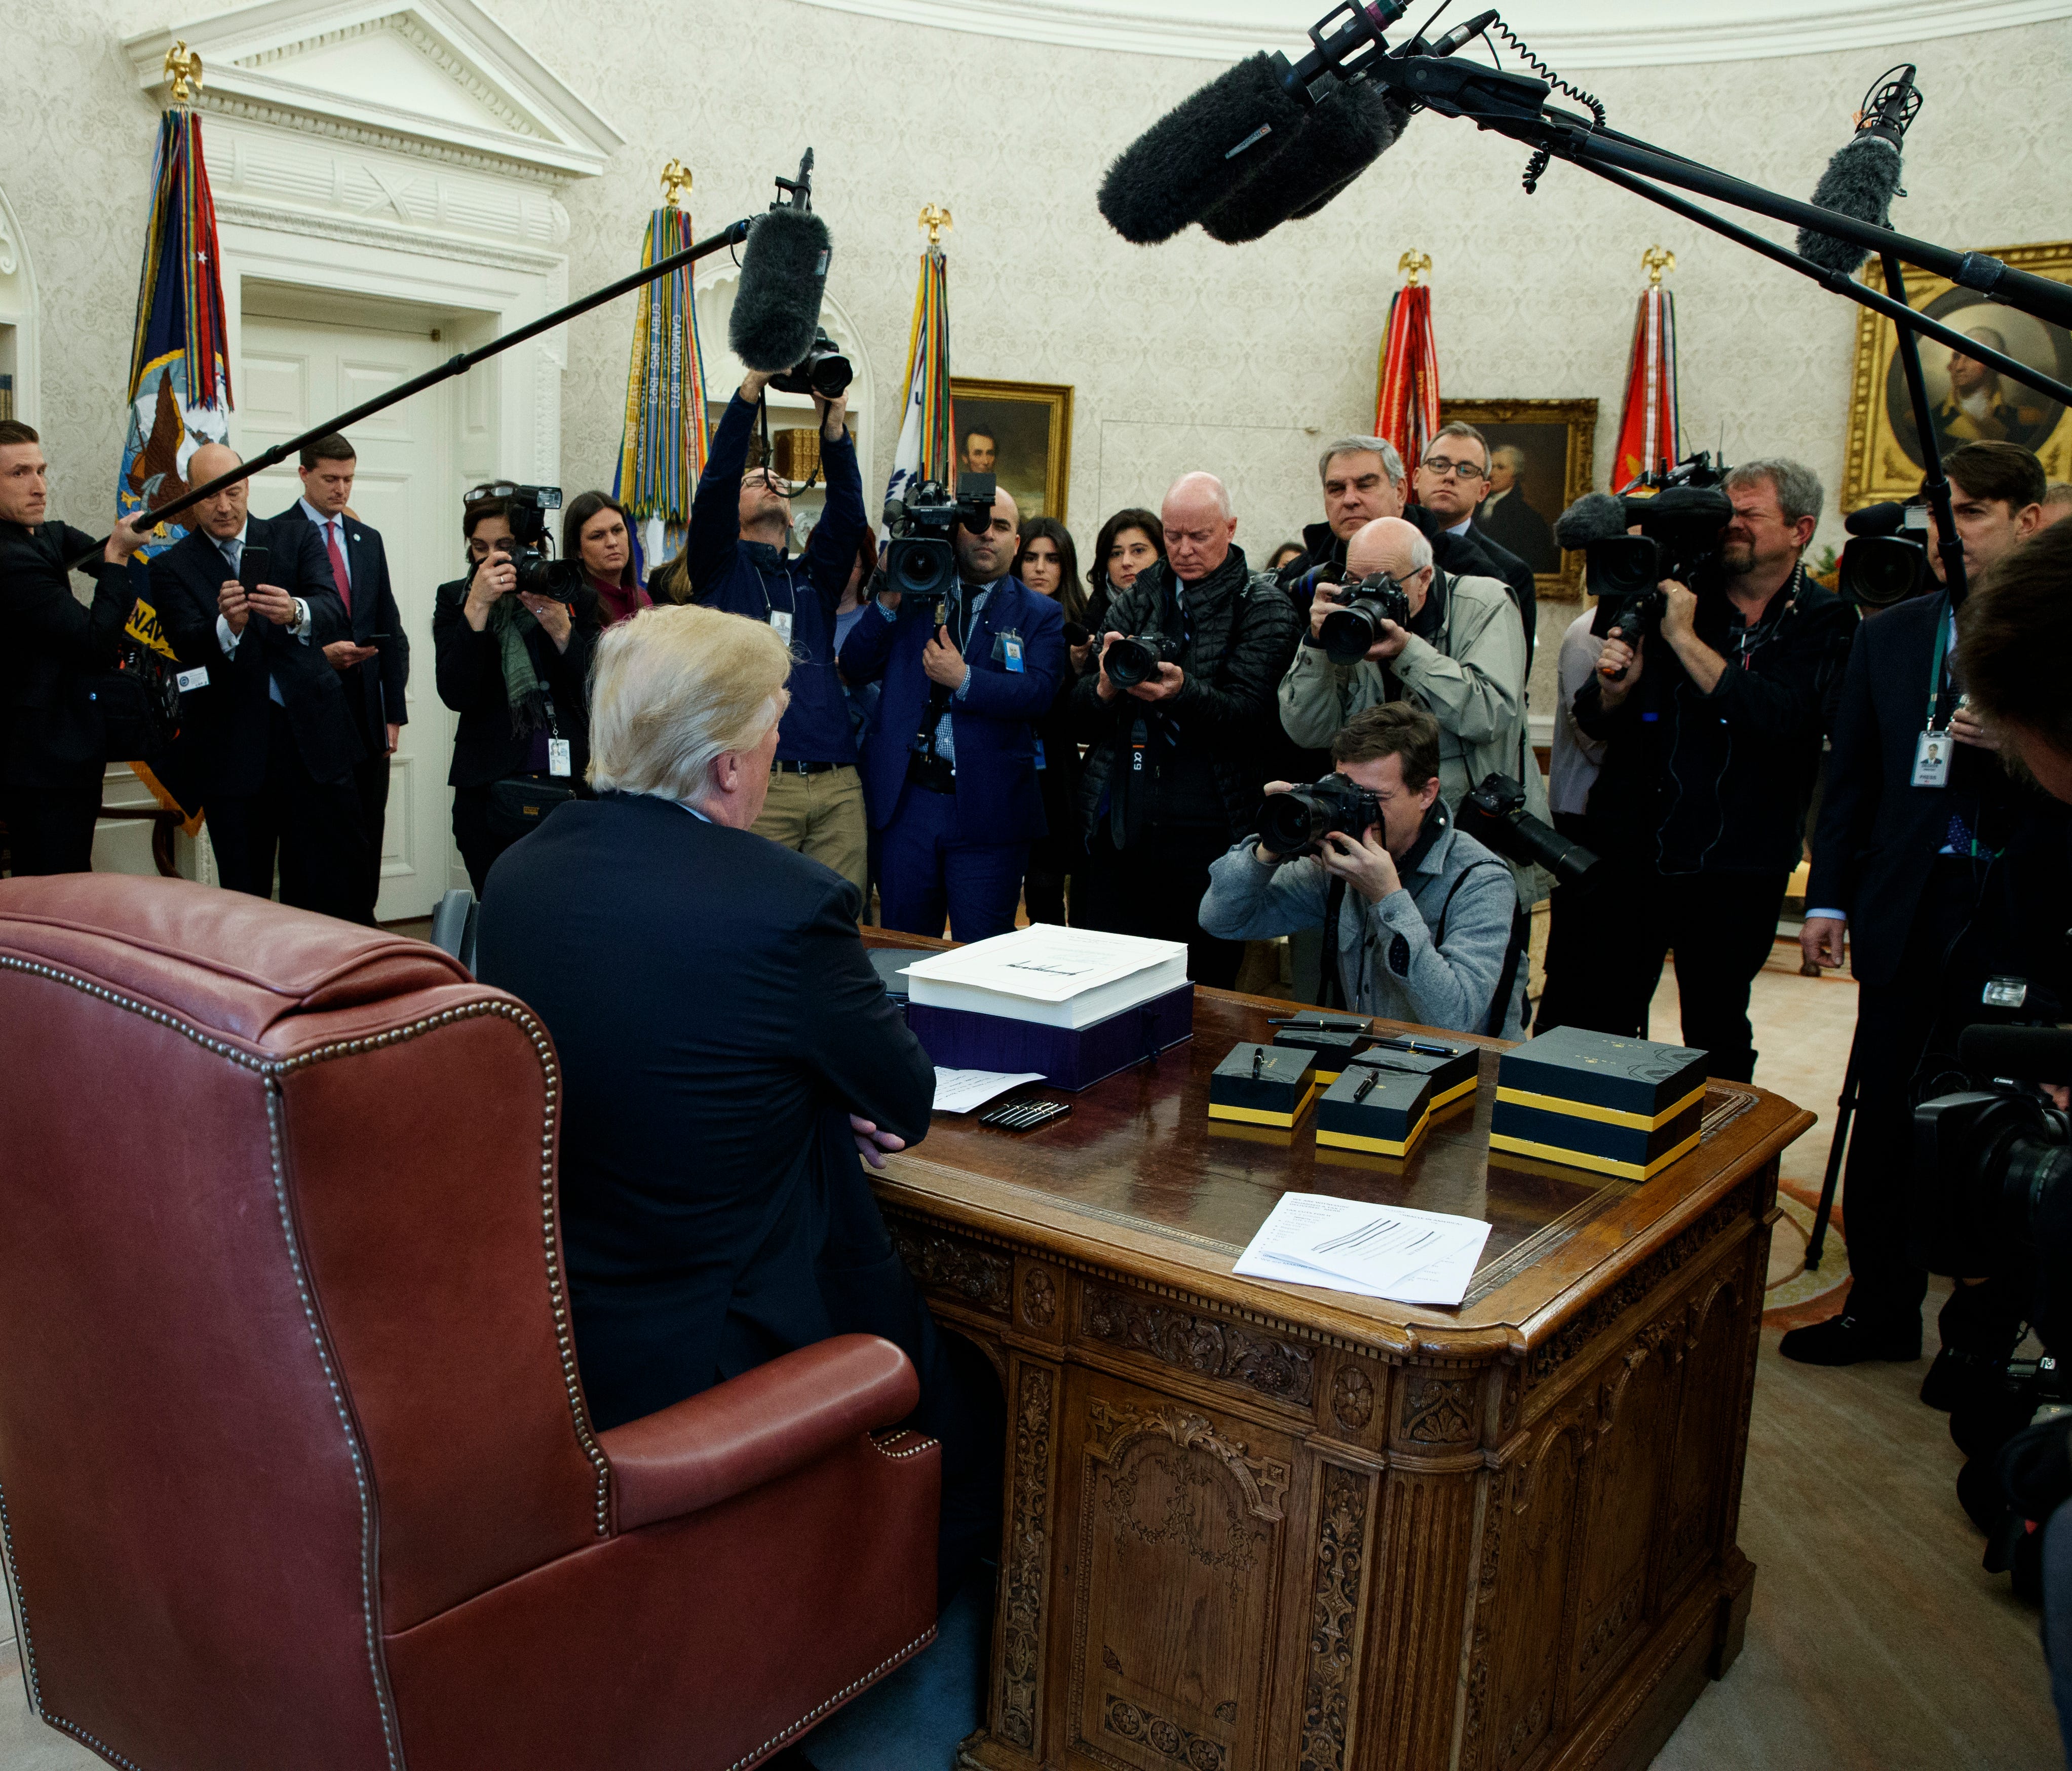 President Trump speaks to reporters in the Oval Office after signing the tax bill and continuing resolution to fund the government Dec. 22, 2017.